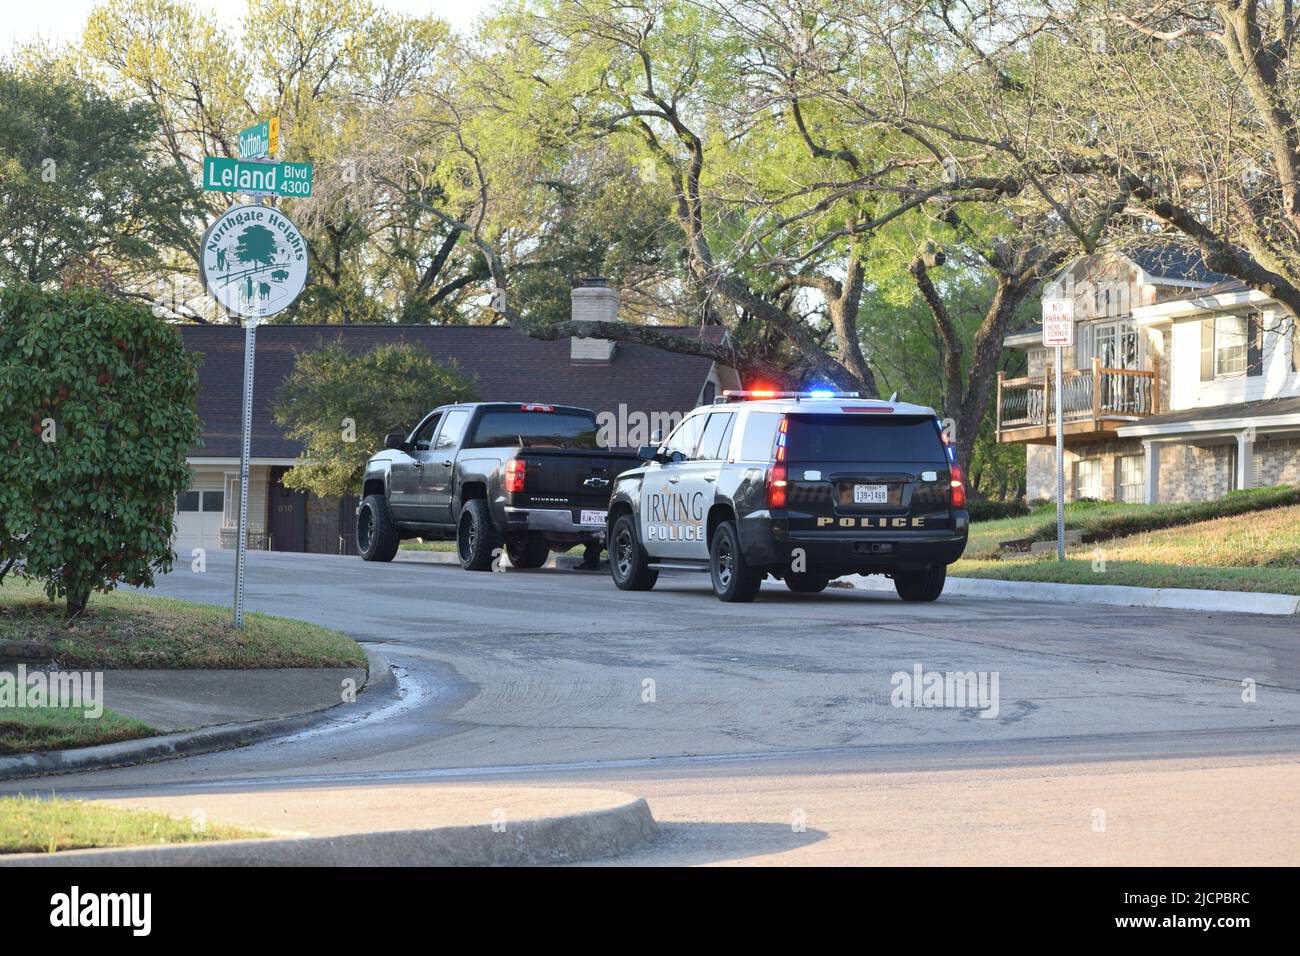 A police officer making an early morning traffic stop of a black Chevrolet Silverado pick up truck in Irving, Texas Stock Photo